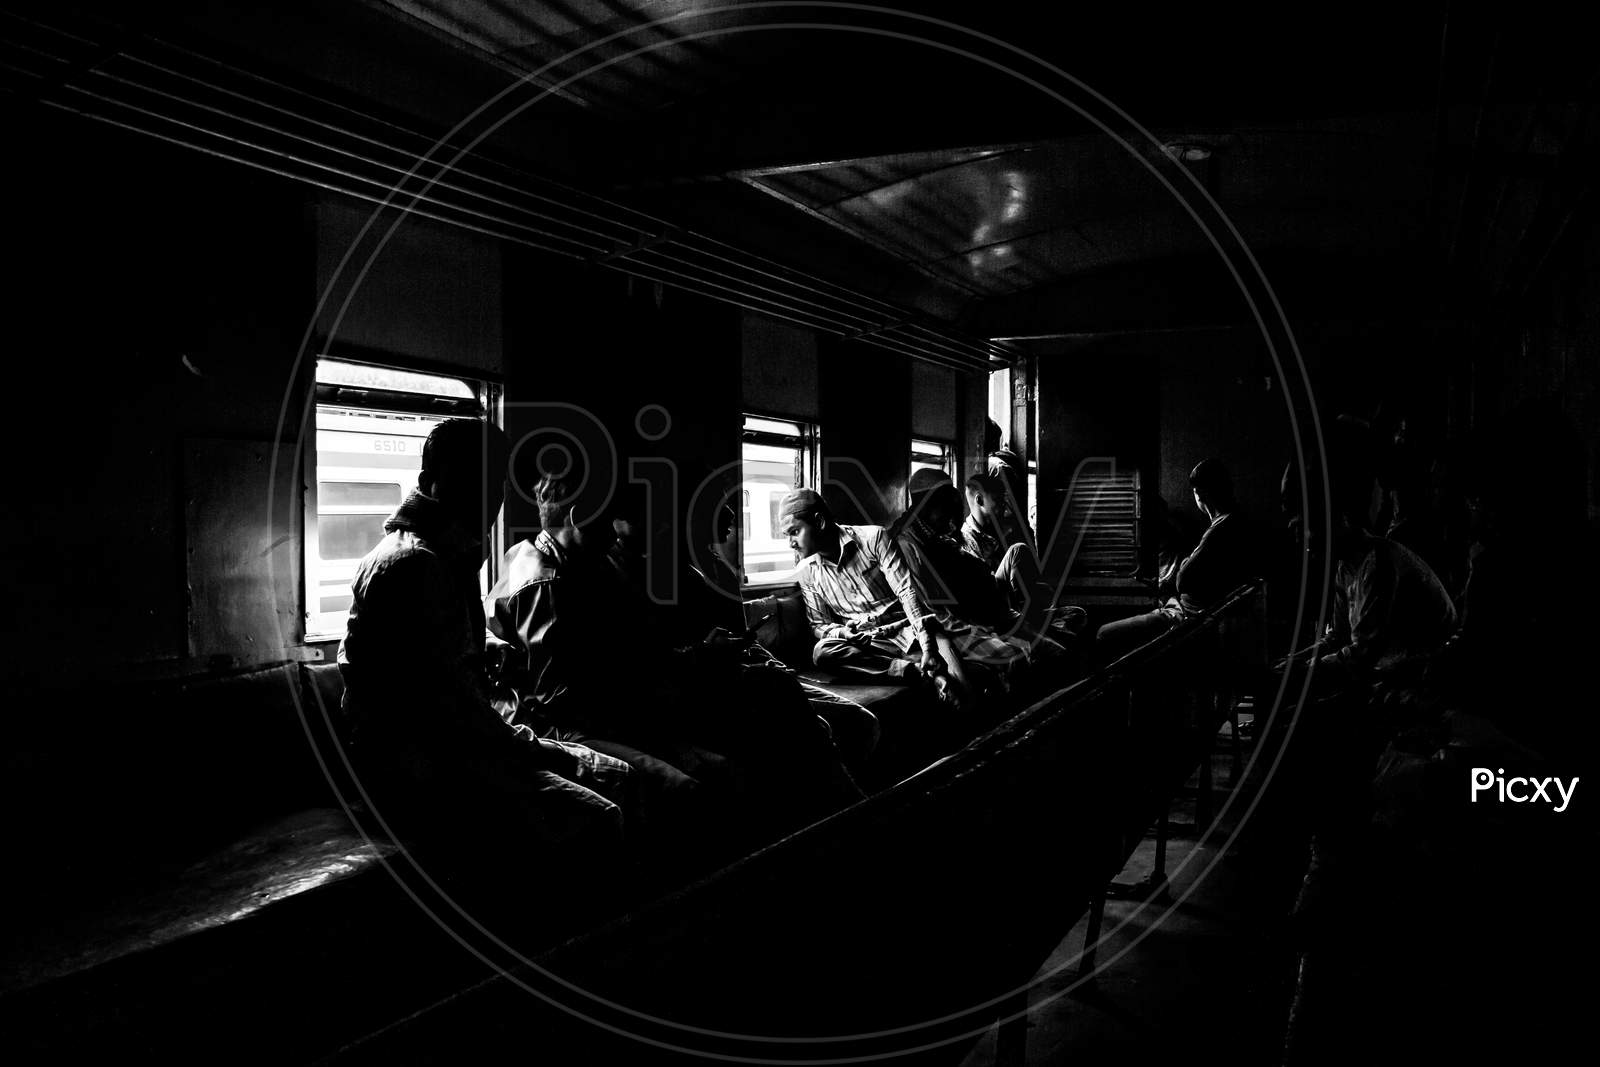 The Candid Motion Of Local Train Passenger I Captured This Image On 19 February 2019 From Dhaka, Bangladesh, South Asia.